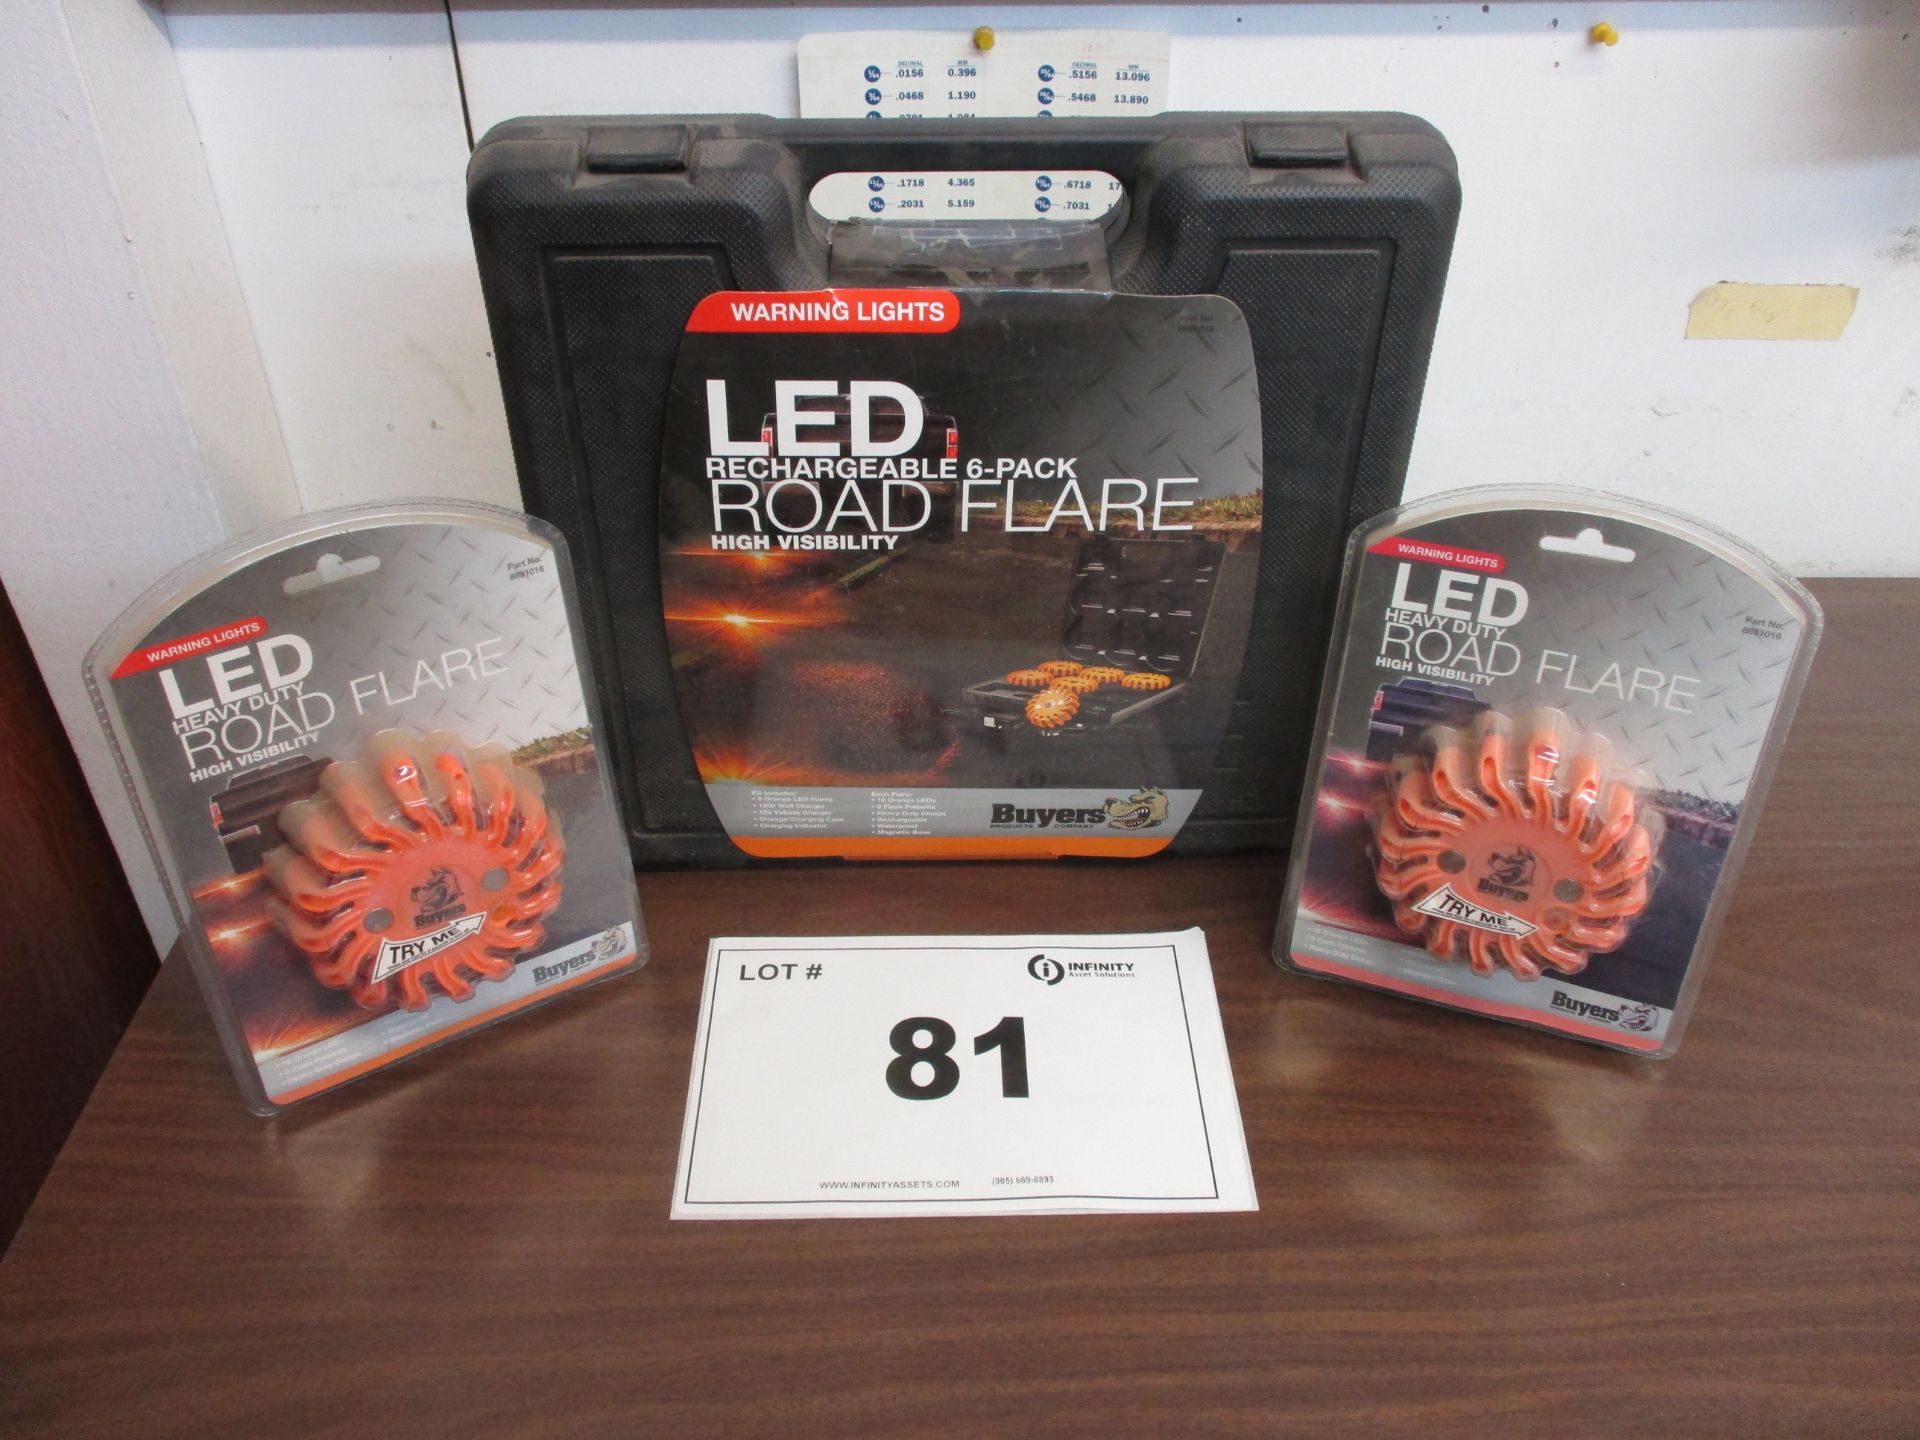 BUYERS LED RECHARGEABLE 6 PACK ROAD FLARE KIT PLUS 2 LED HD ROAD FLARES